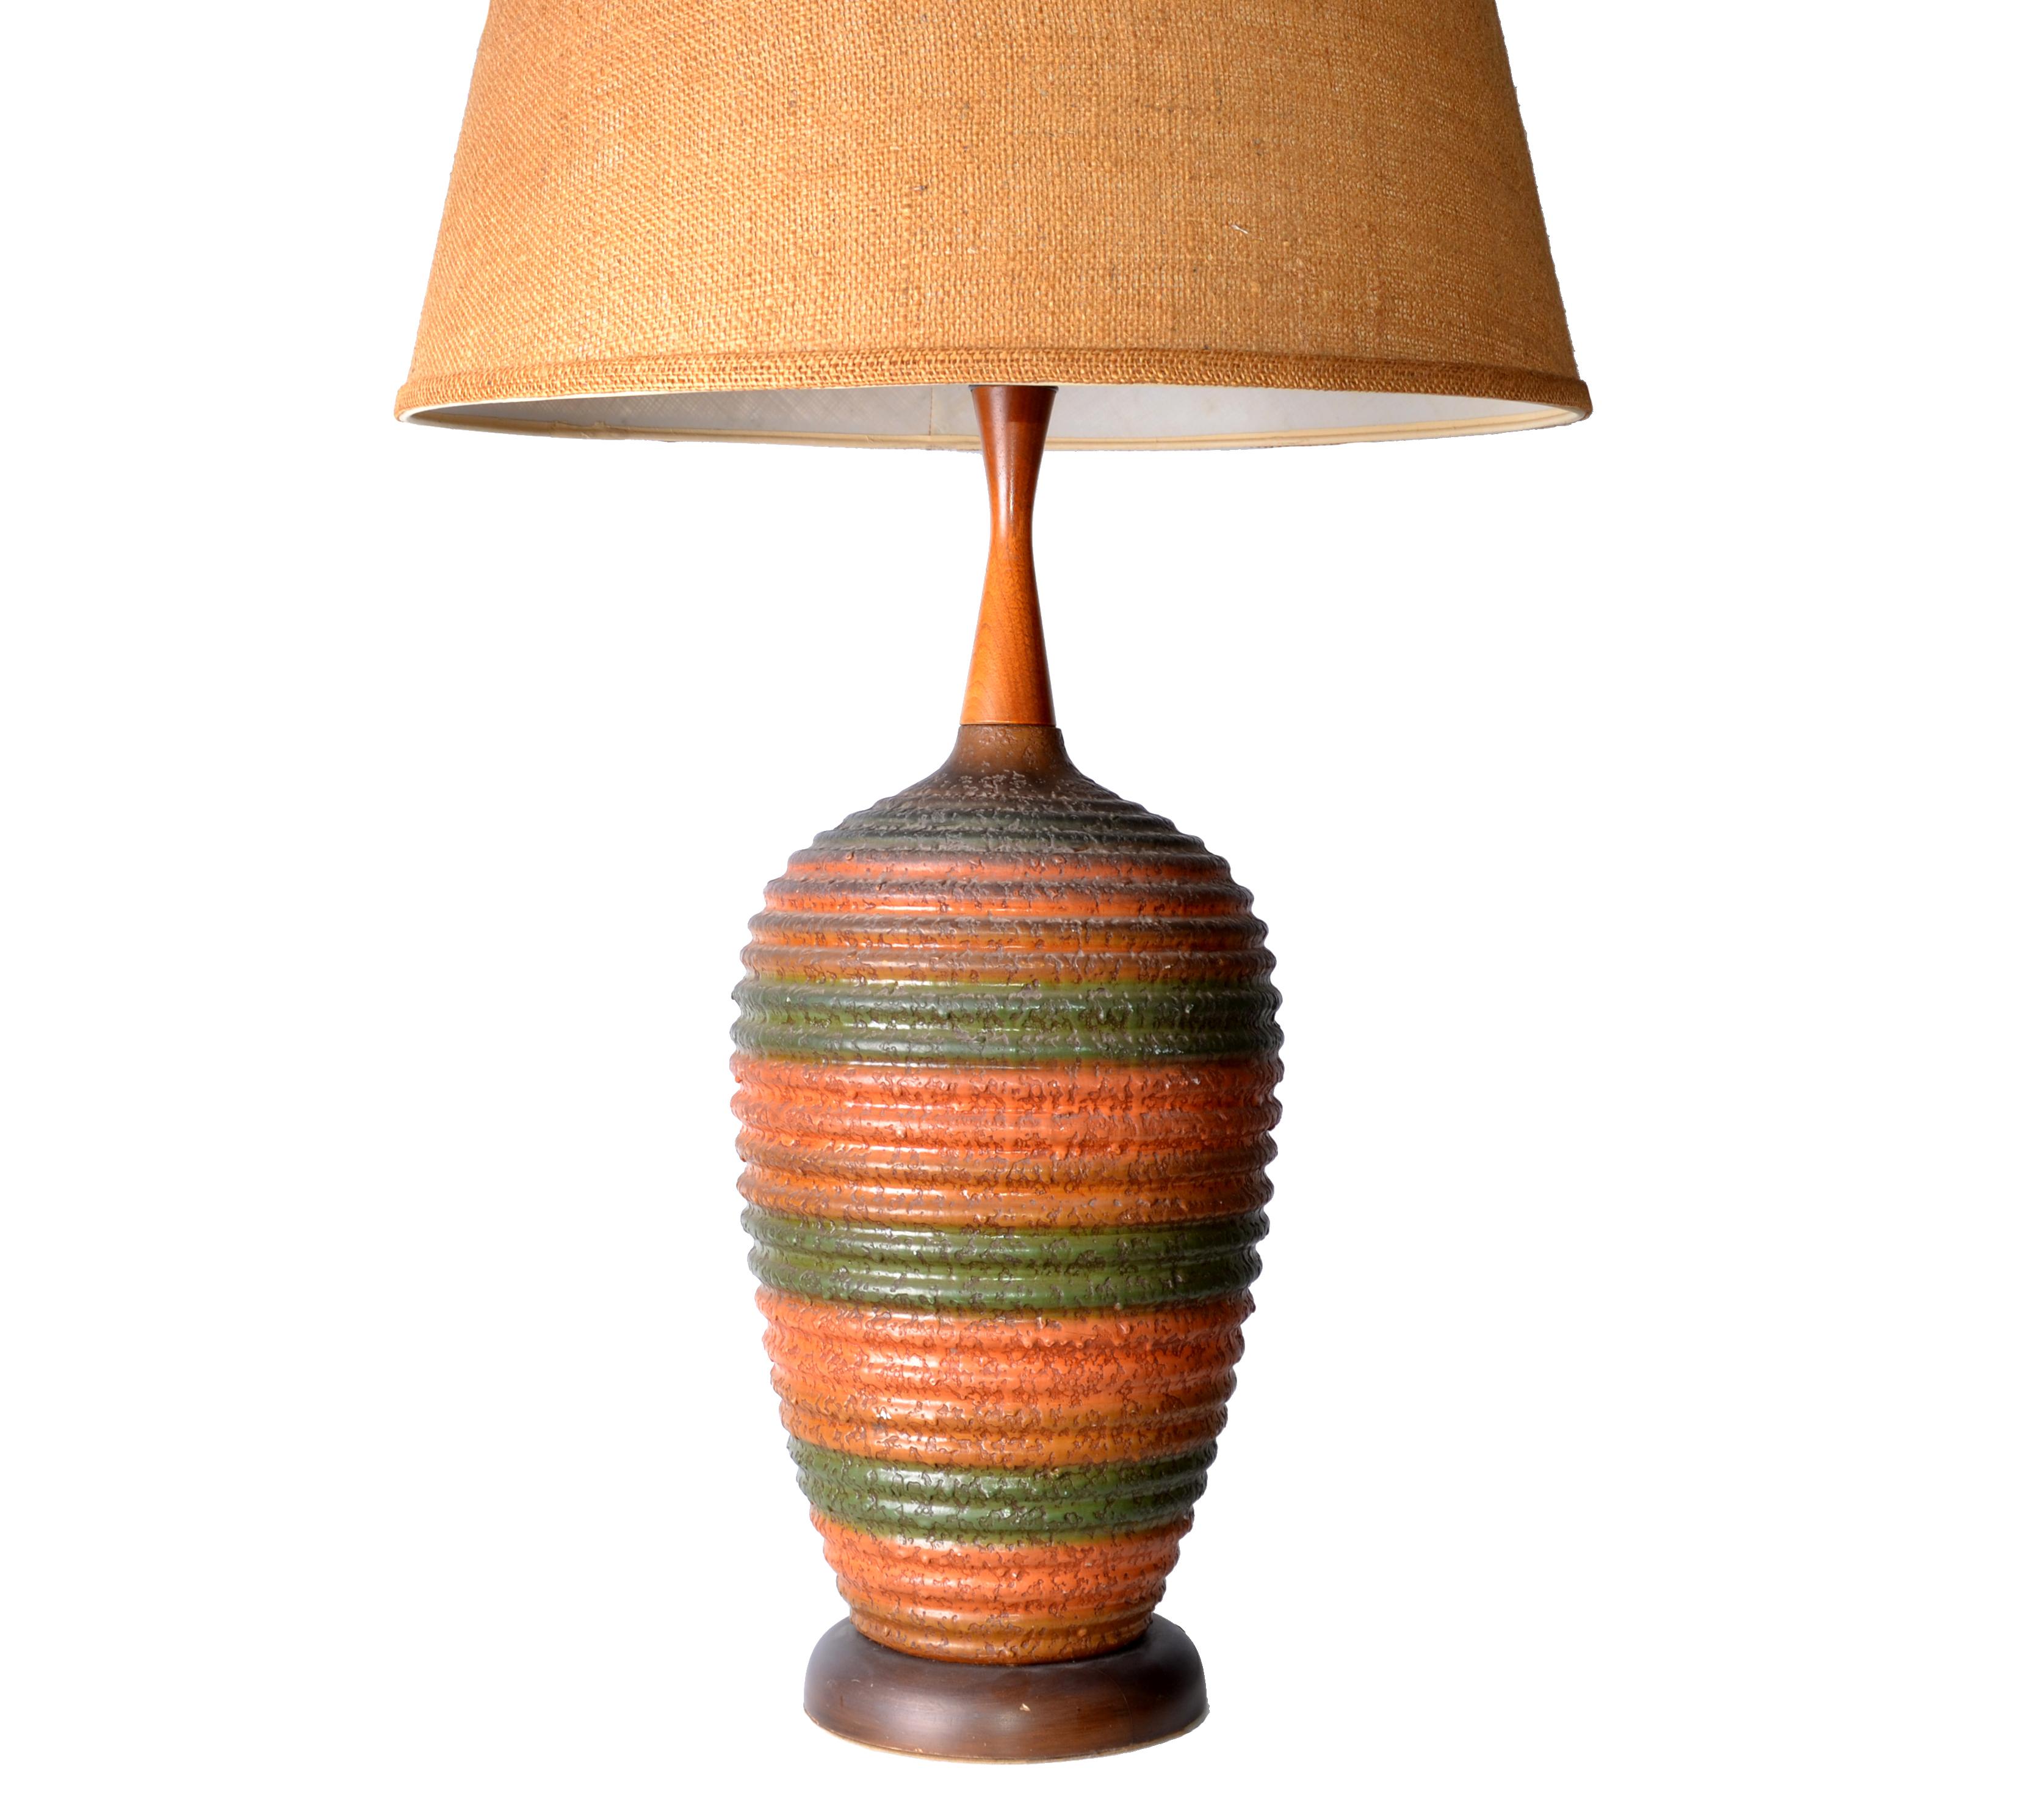 Offering a Danish modern striped pottery table lamp with original linen shade and a neck made out of teak. It is in perfect working condition.
Uses a max. 60 wattage light bulb.
Dimension shade: Diameter 21.25 inches, height 18.25 inches
Height